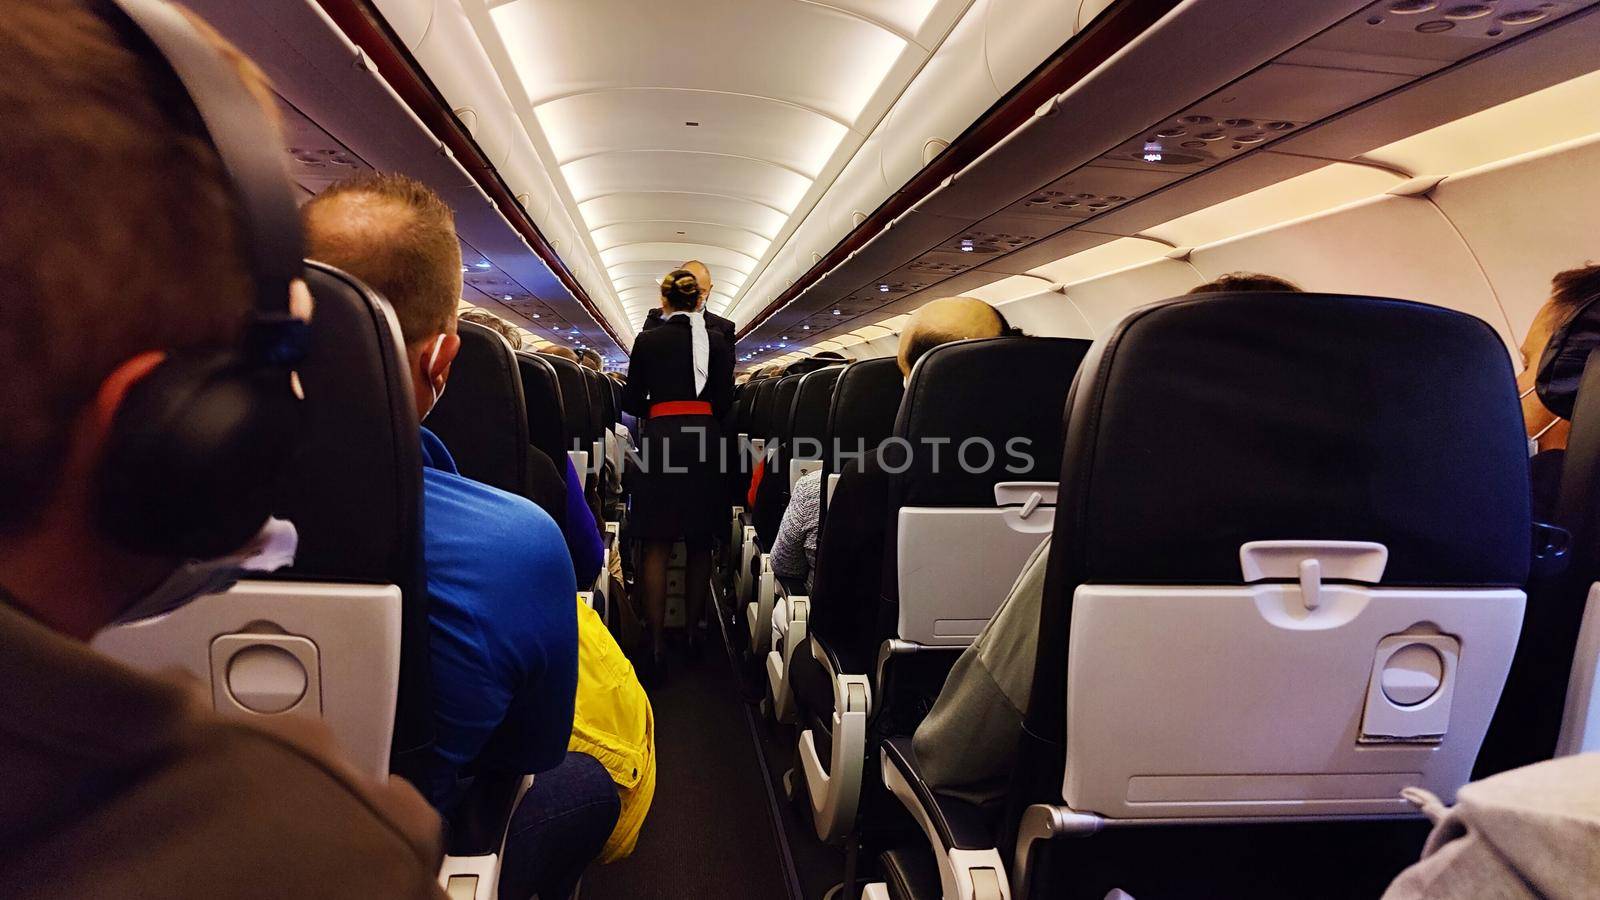 Interior of airplane with passengers on seats and stewardess in uniform walking the aisle by kasto